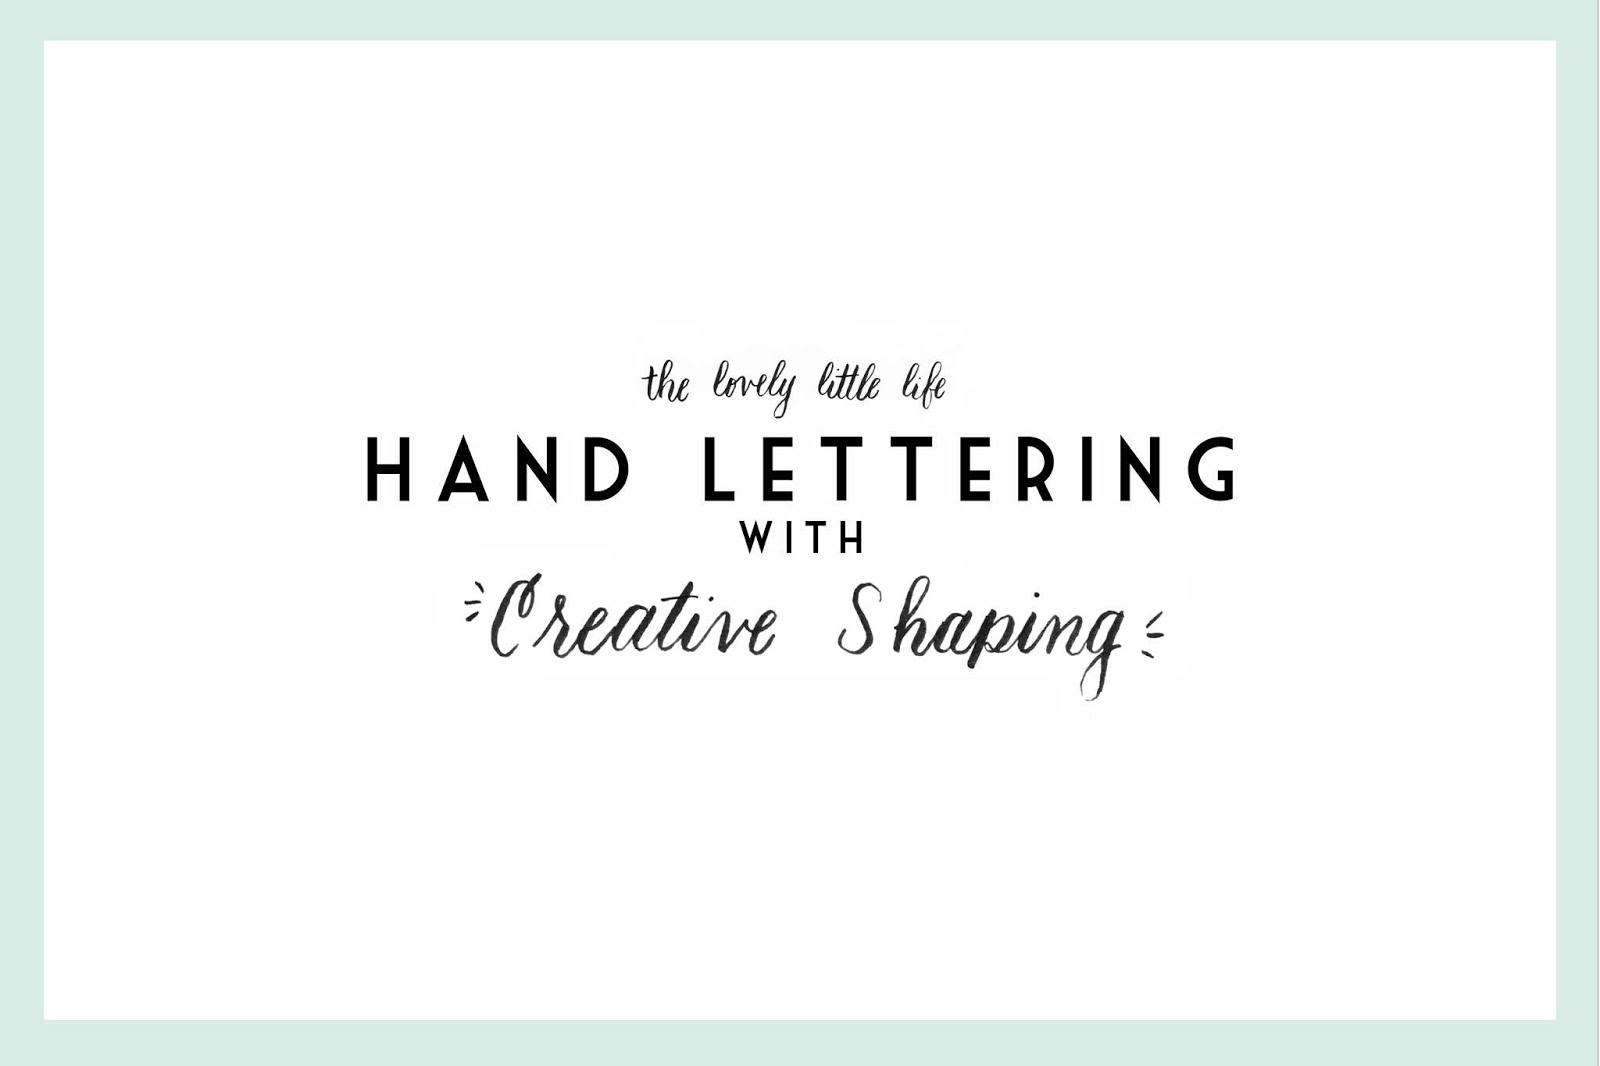 Hand Lettering with Creative Shaping